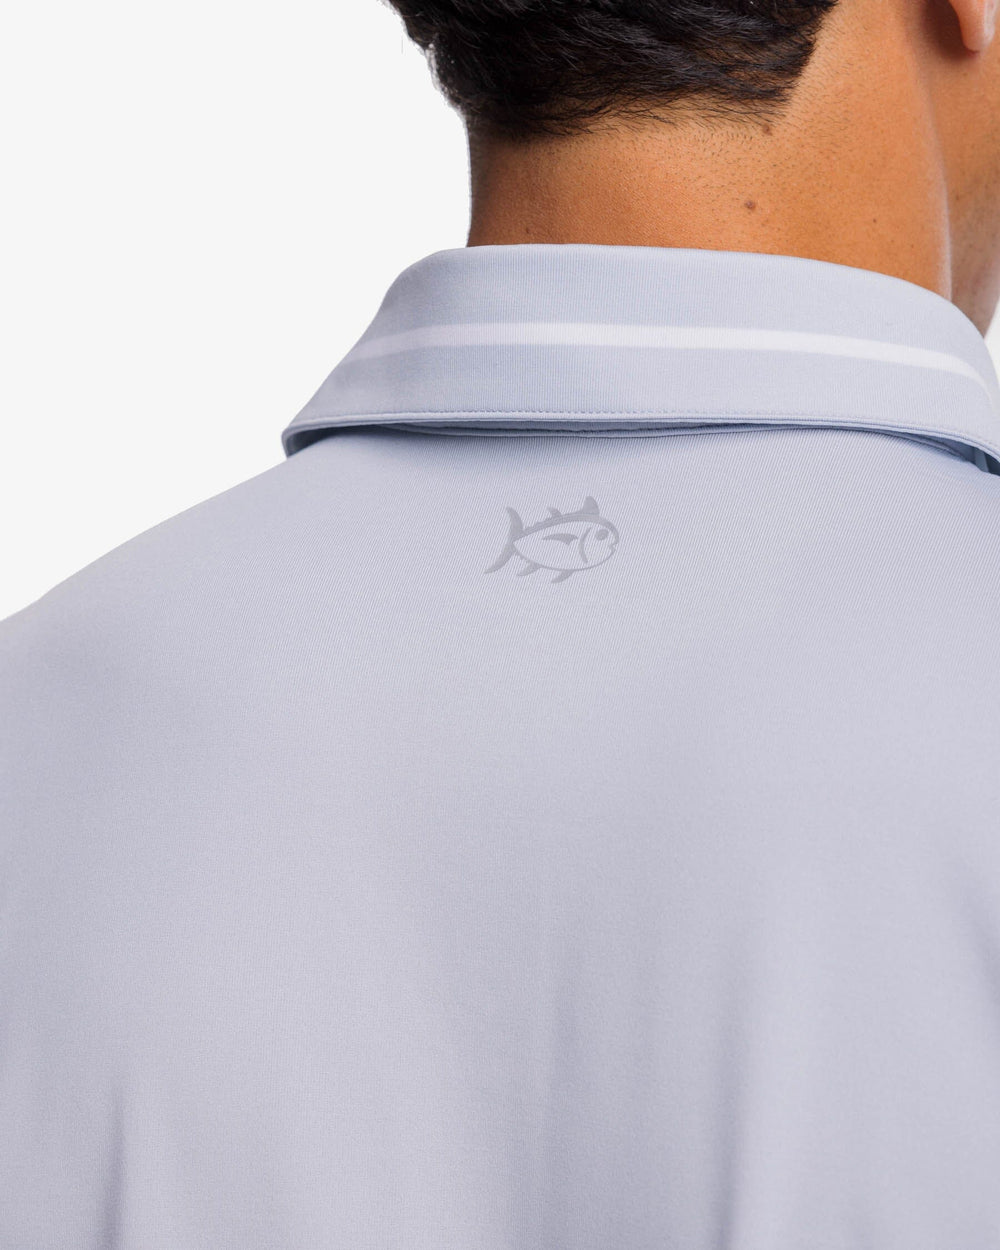 The yoke view of the Southern Tide Driver Brantley Stripe Performance Polo Shirt by Southern Tide - Slate Grey